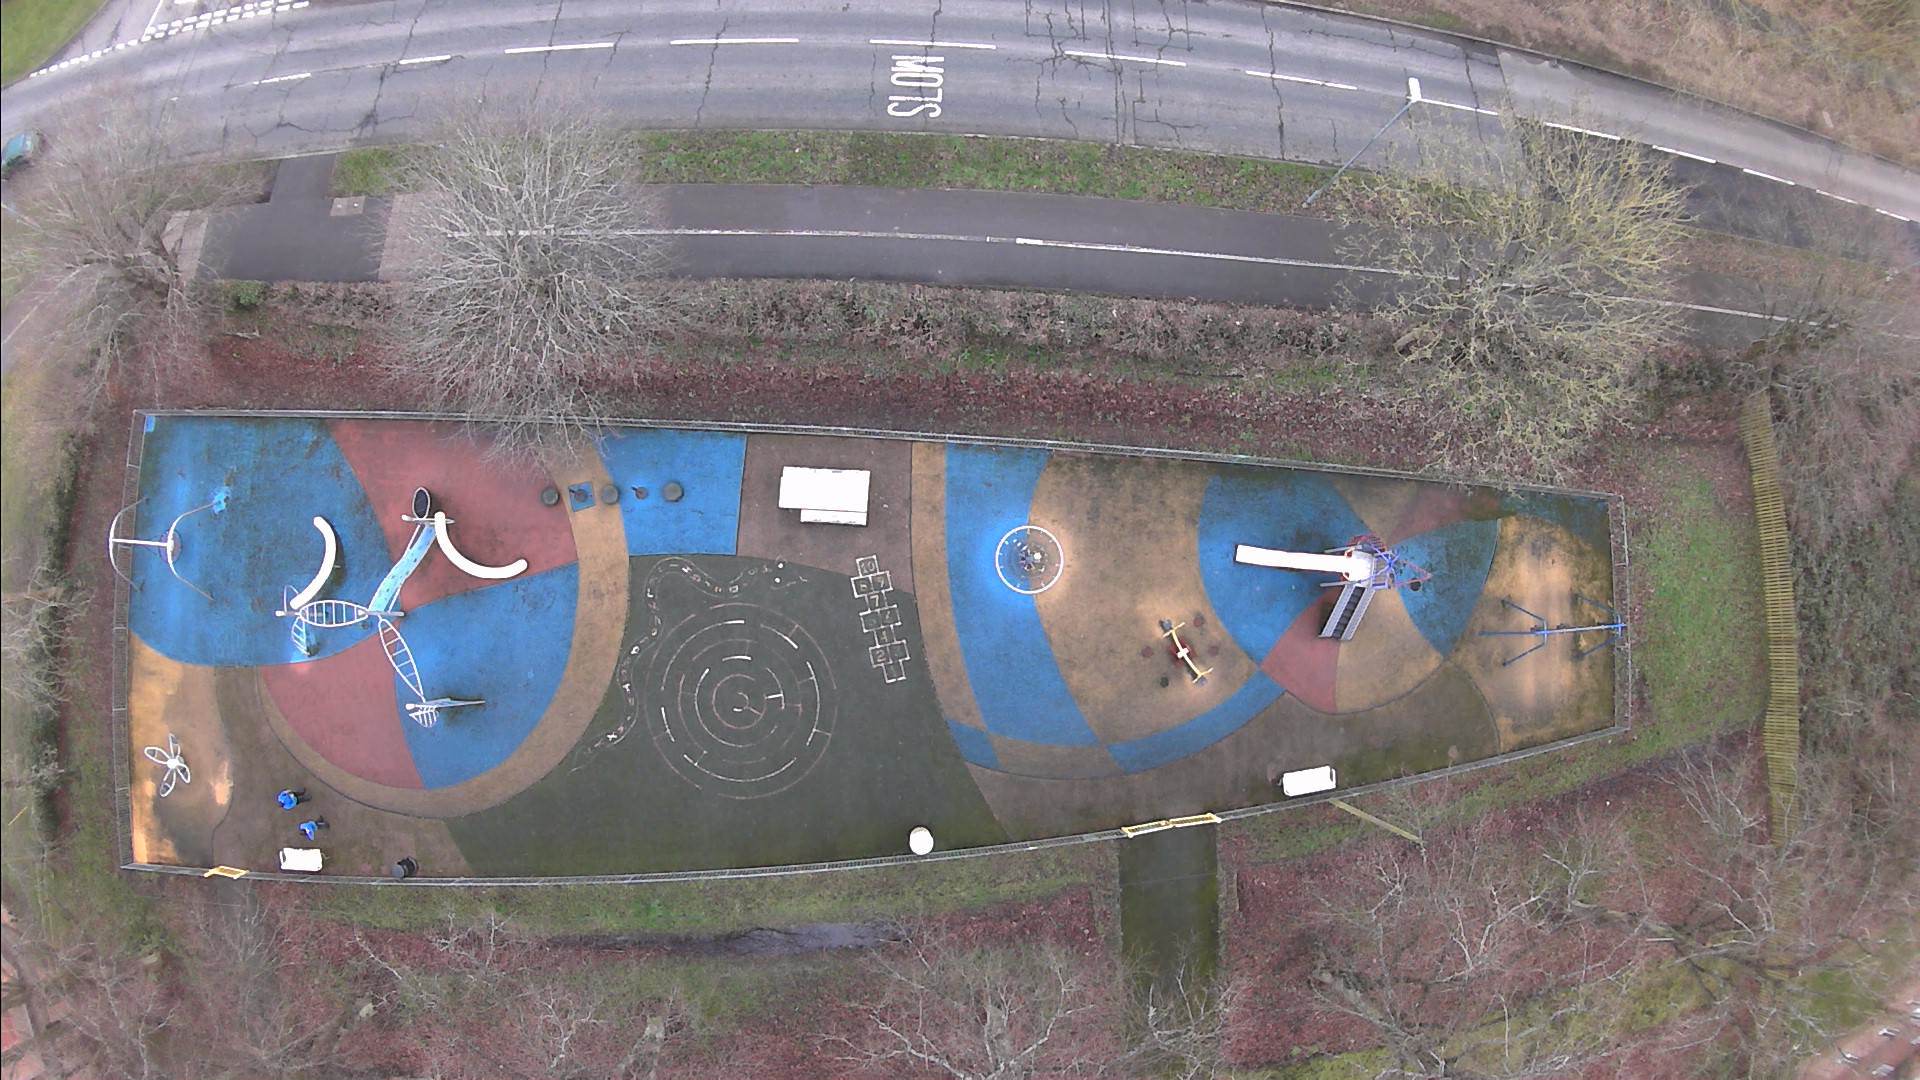 A drity playpark from above